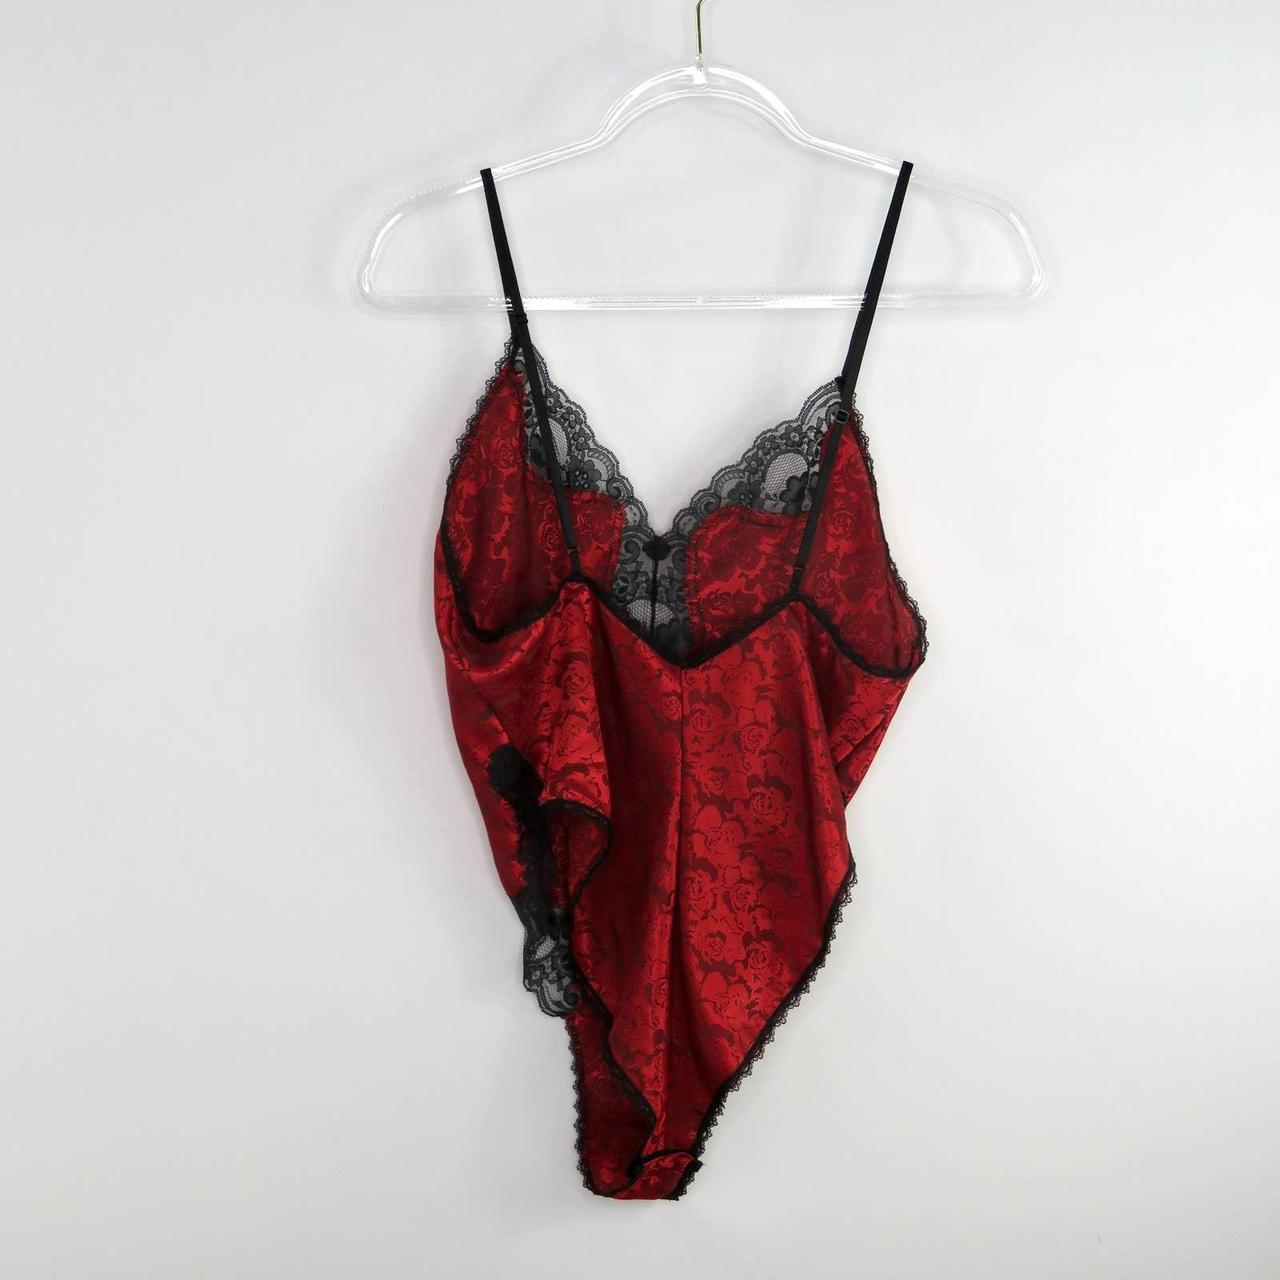 American Vintage Indulgence Red and Black Lace Cami... - Depop